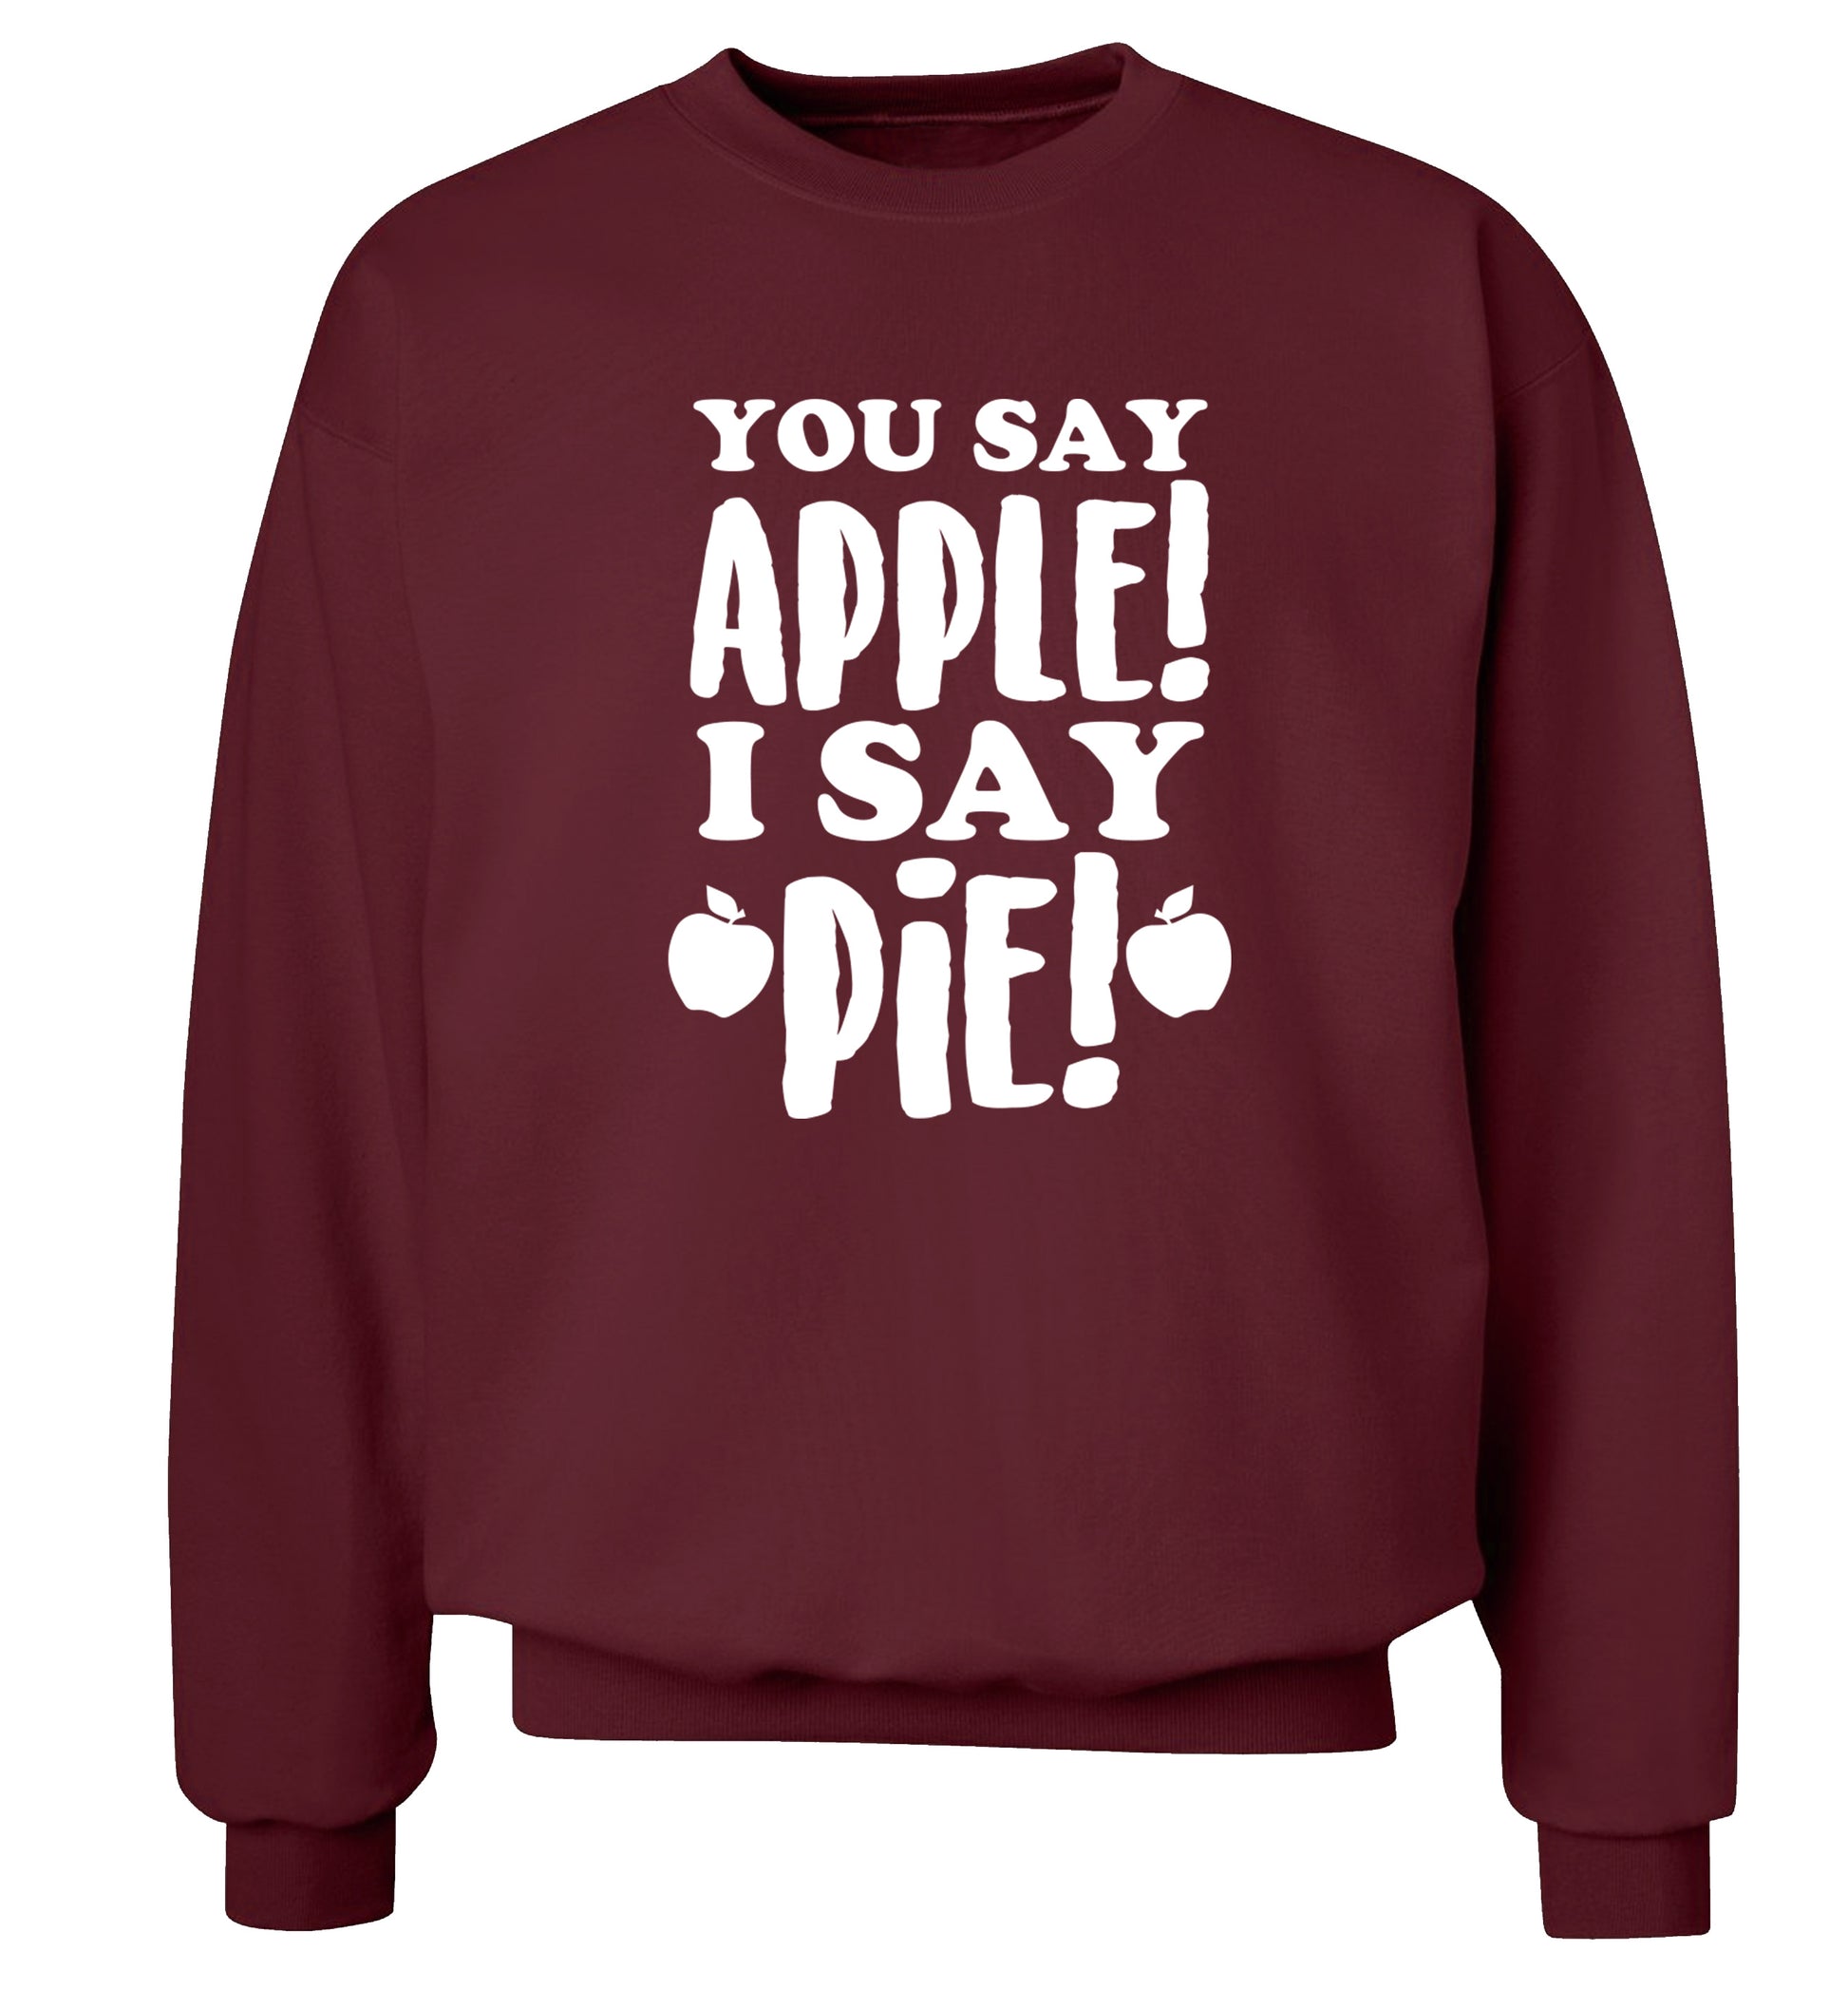 You say apple I say pie! Adult's unisex maroon Sweater 2XL